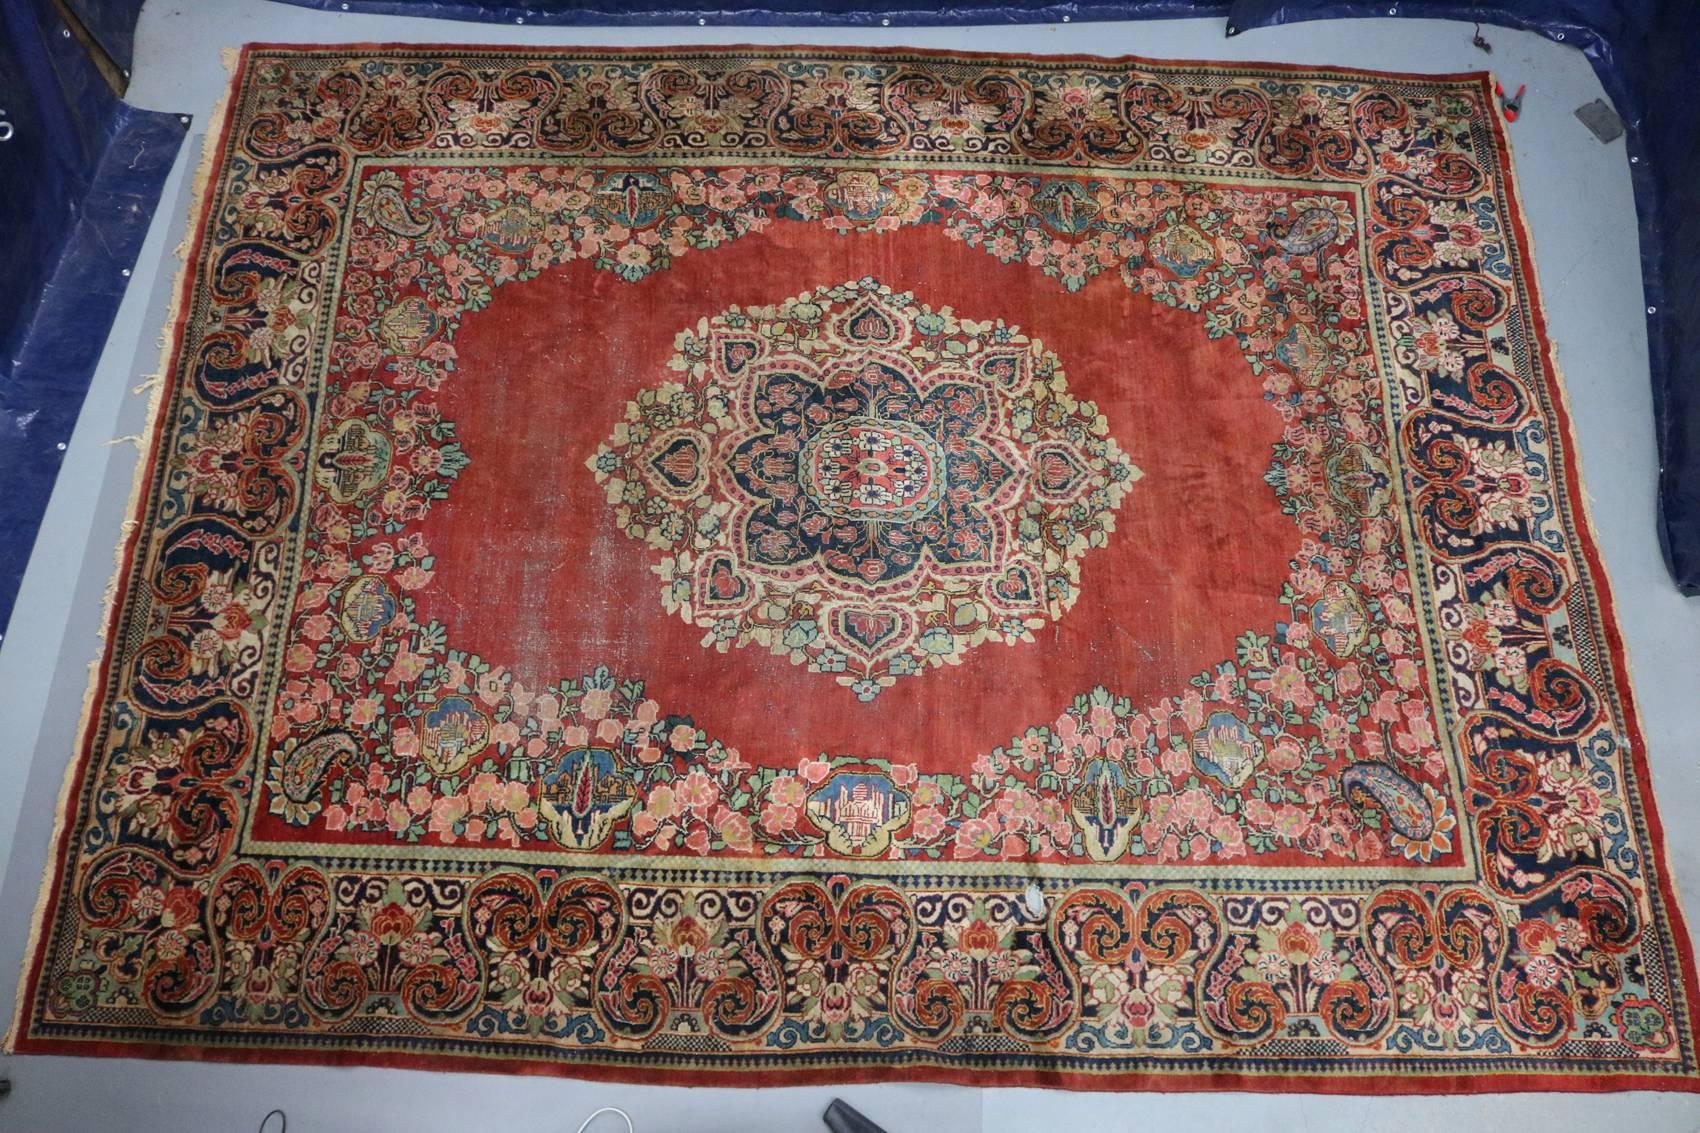 Antique hand knotted Persian oriental Mahal carpet features central floral medallion on red ground and with floral and scroll border, early 20th century

Measures - 13.75' x 10.5'